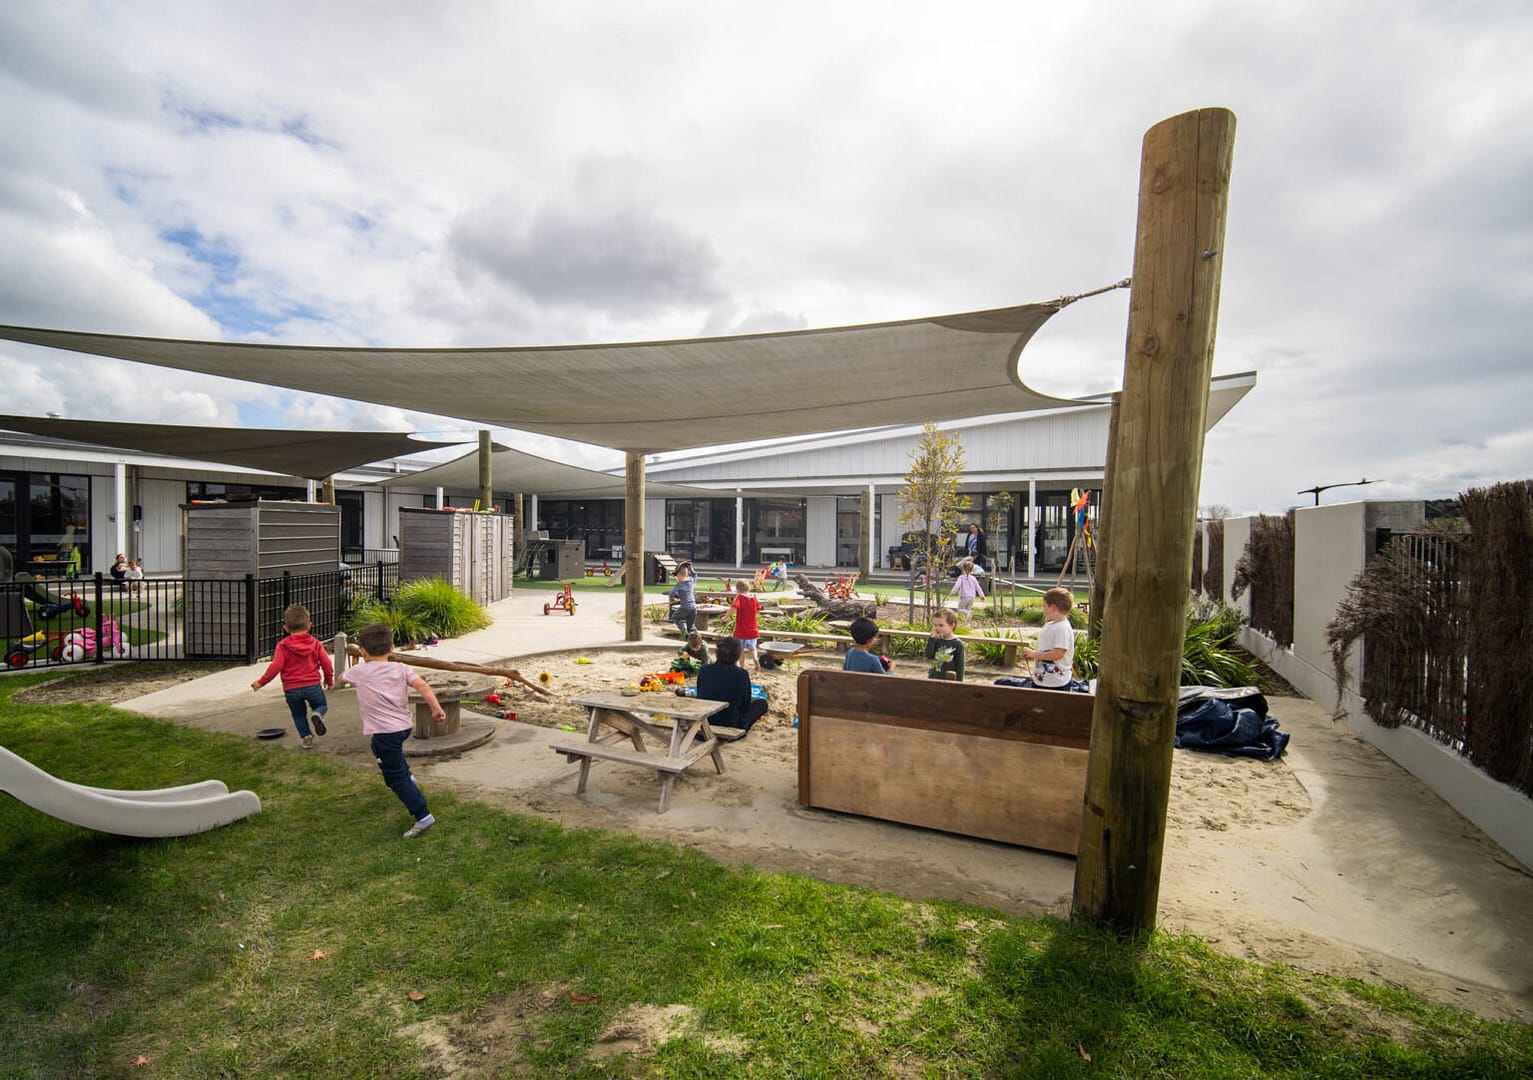 Shade in playgrounds with children playing freely